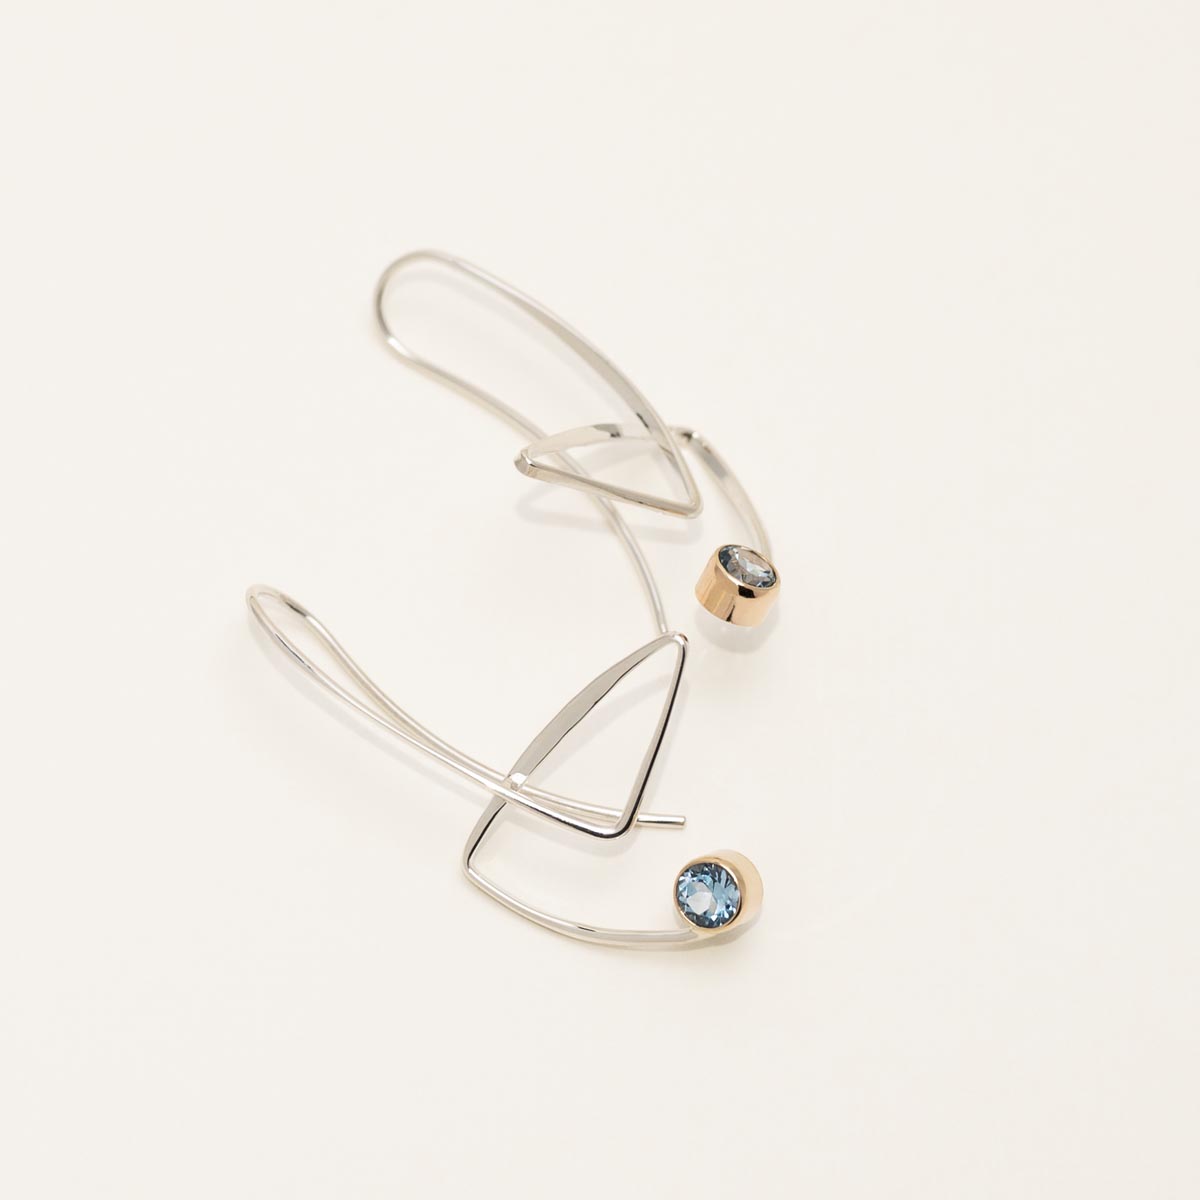 E.L. Designs Blue Topaz Gadabout Earrings in Sterling Silver and 14kt Yellow Gold